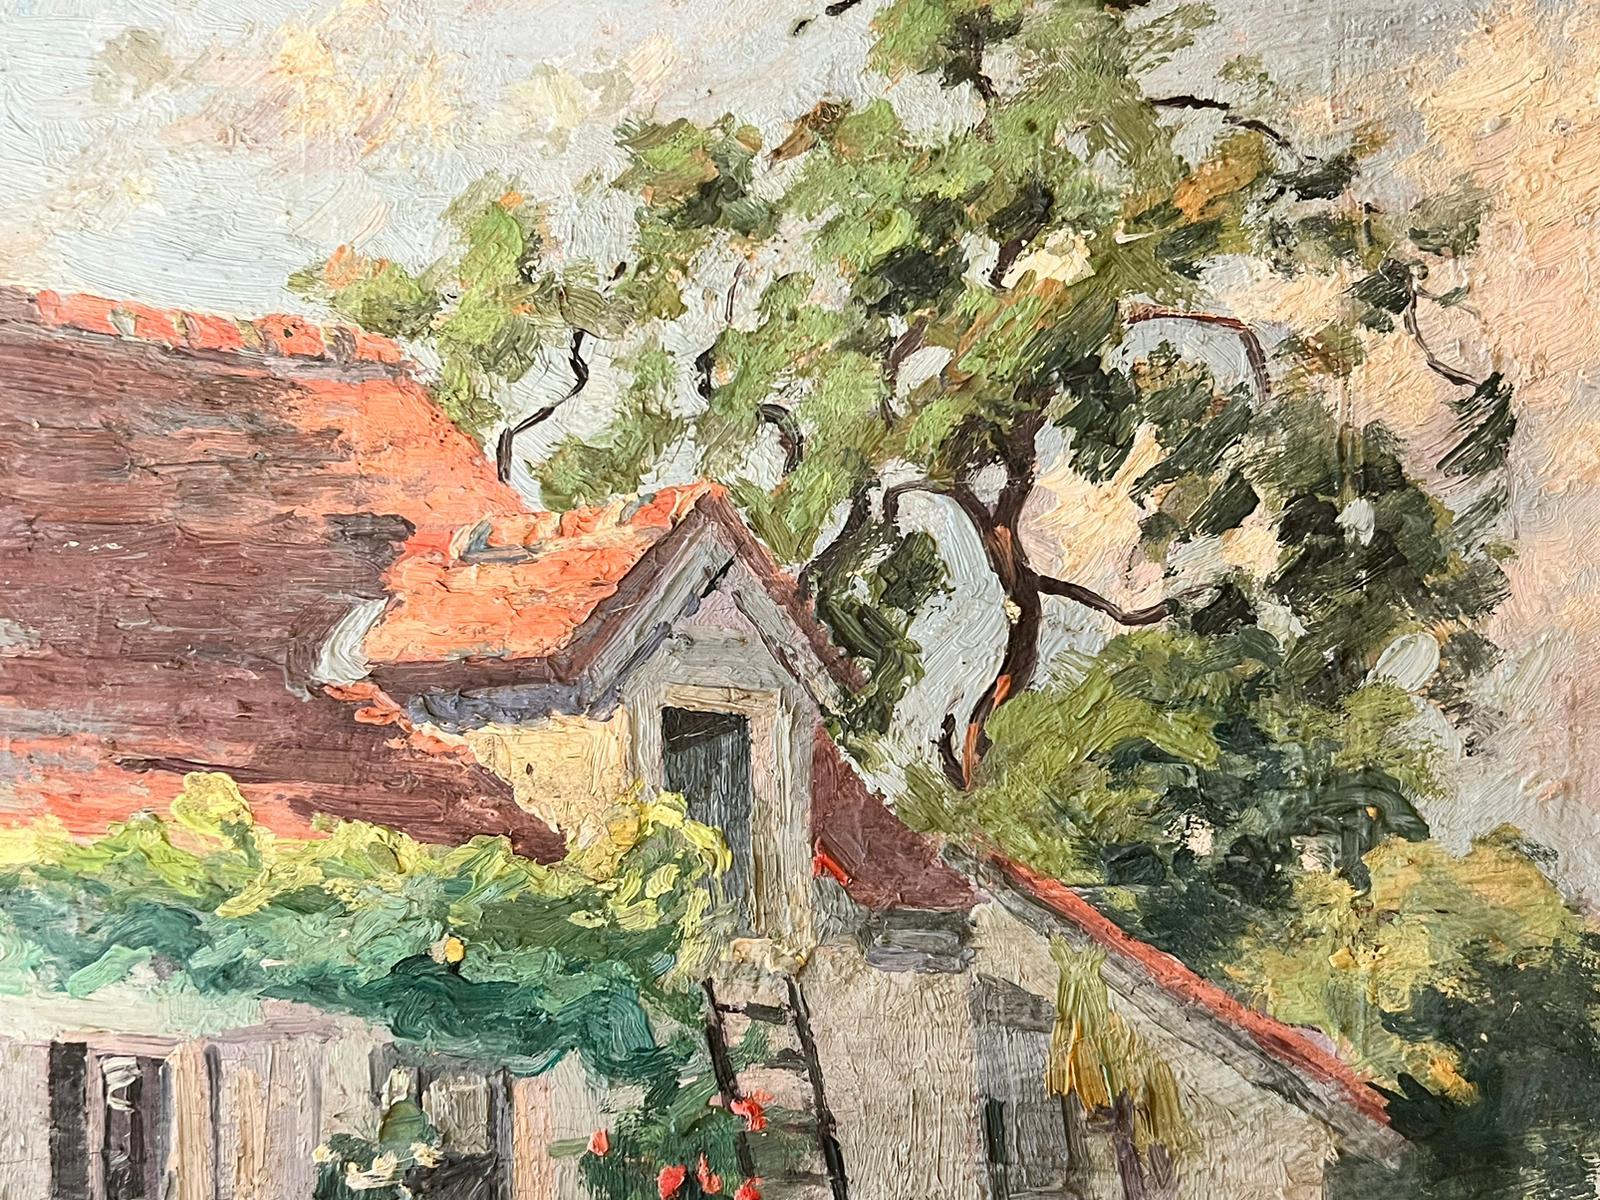 Artist/ School: Suzanne Crochet (French c. 1930), female French Impressionist artist

Title: The Stone Cottage

Medium: oil on board, unframed 

Size:

board: 9.5 x 13 inches

Provenance: private collection, France

Condition: The painting is in